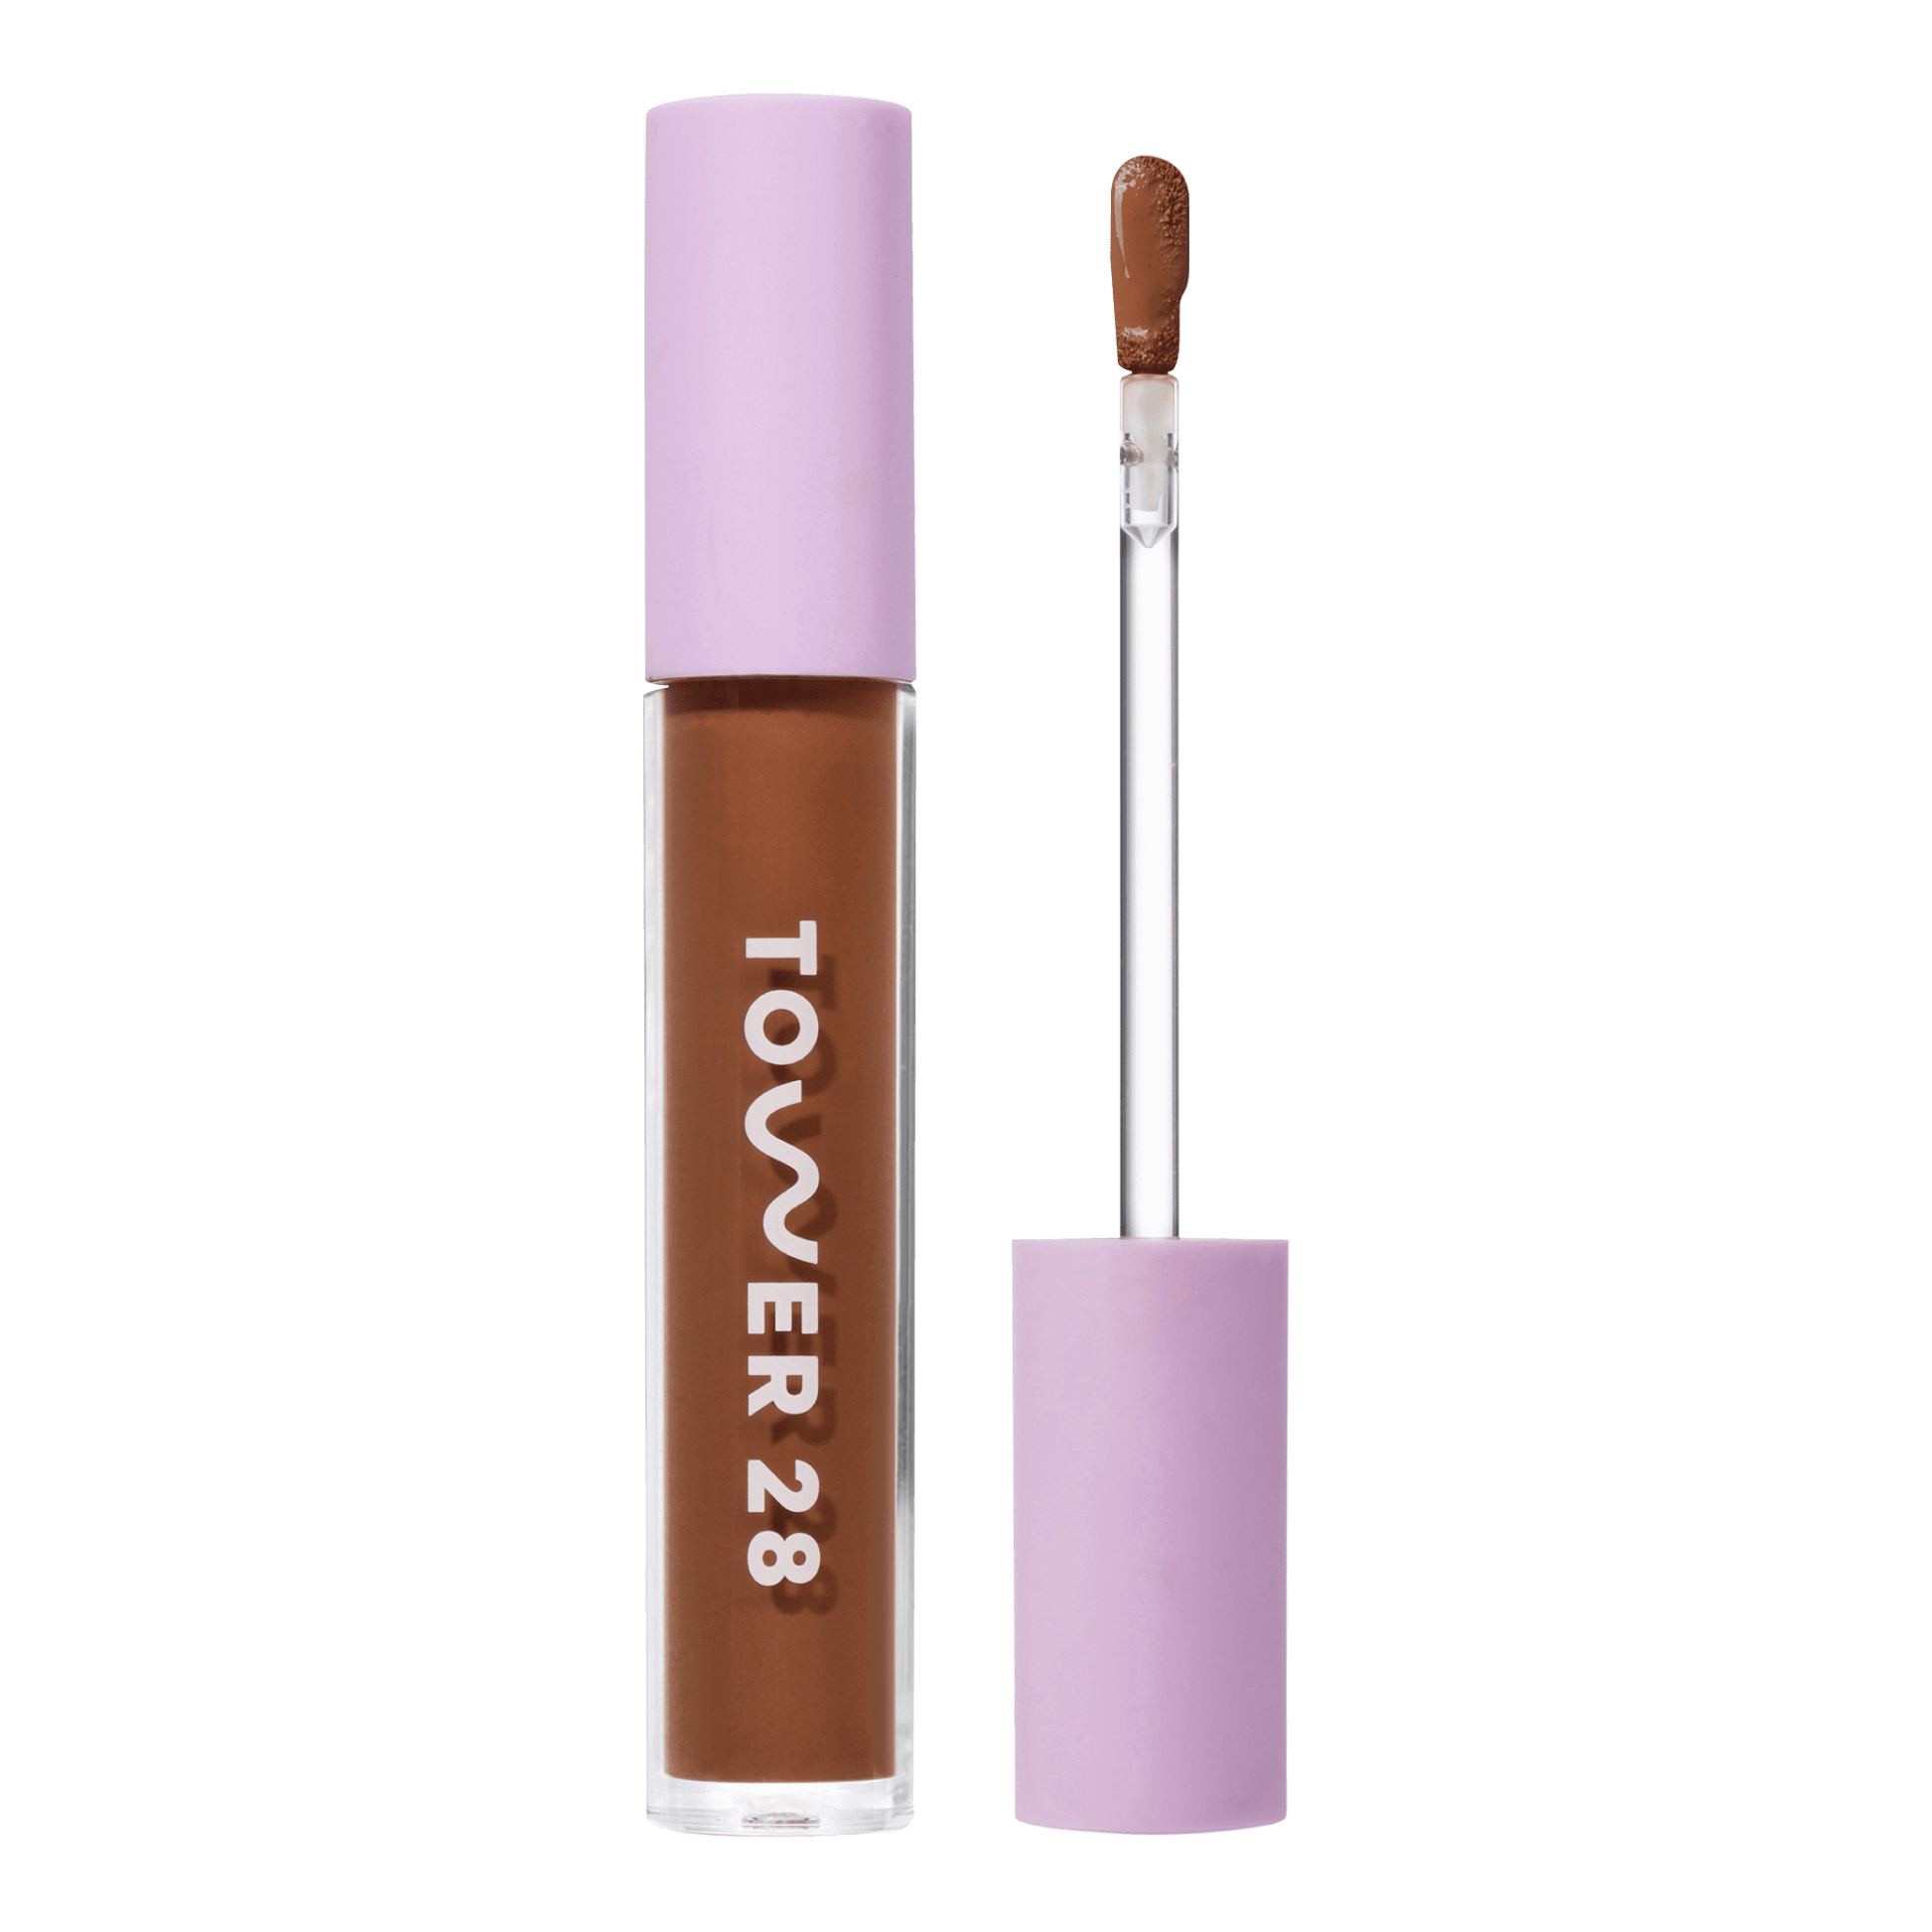 Tower 28 Beauty Swipe Serum Concealer in the shade 17.0 SD